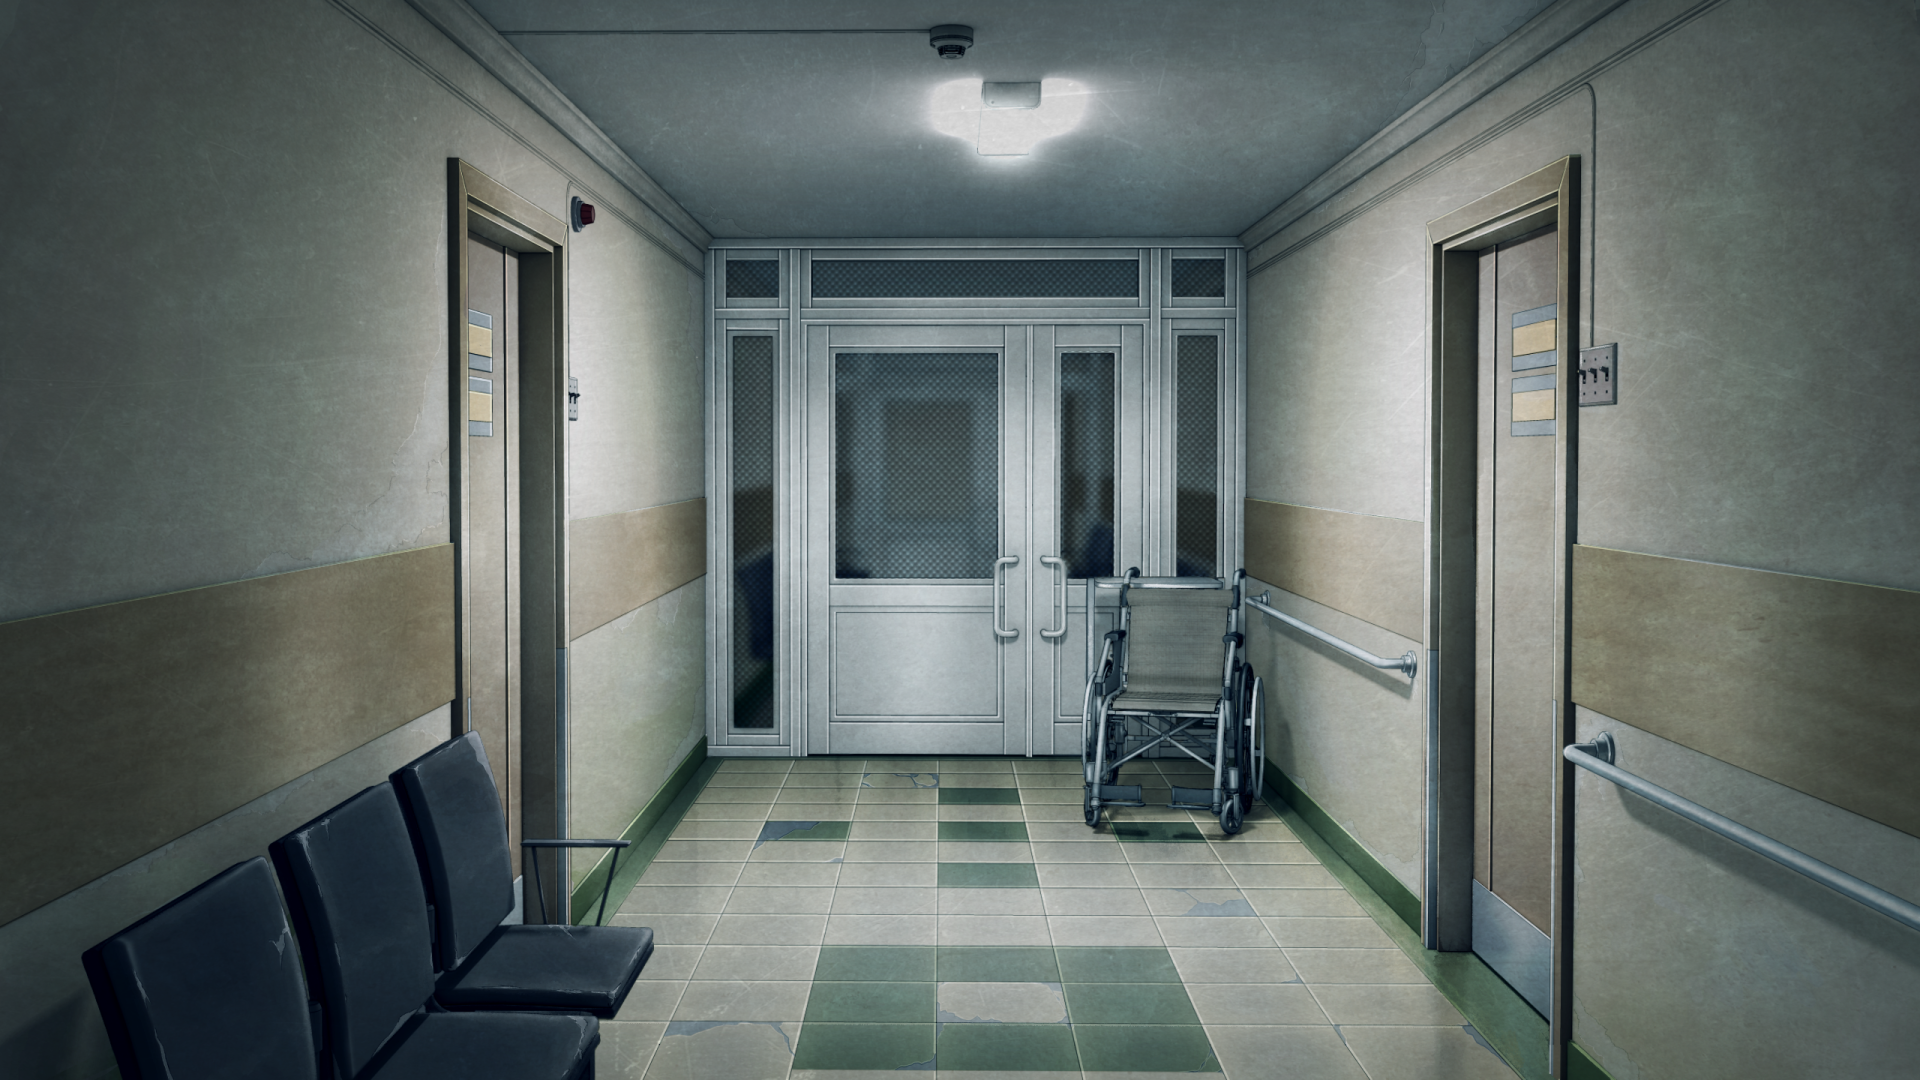 Mobile wallpaper Anime Original Hallway Hospital 1421560 download the  picture for free